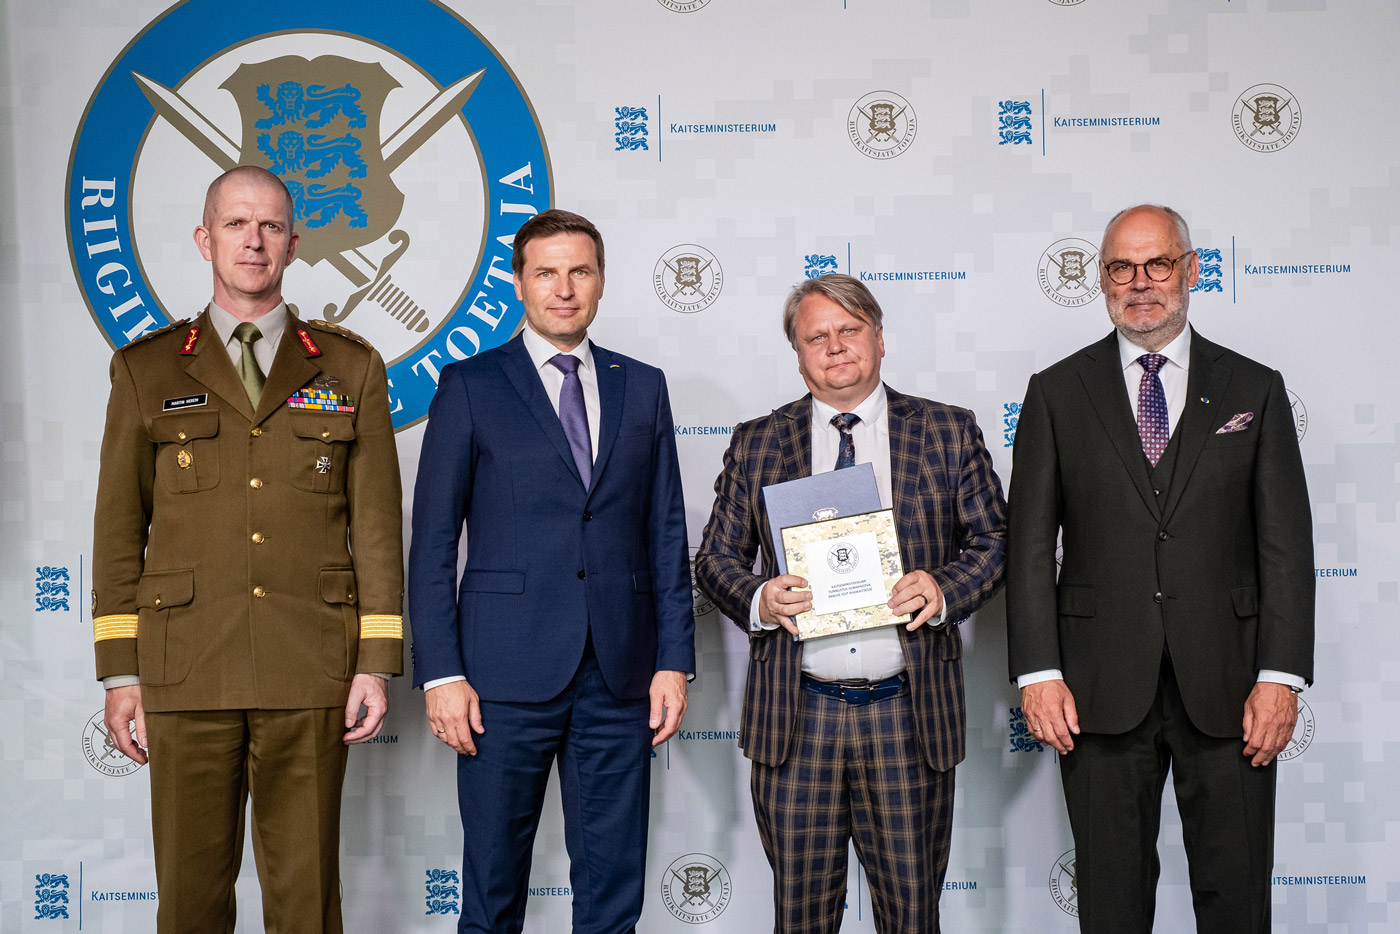 Iute Group received the recognition of “Supporter of defenders of the state”